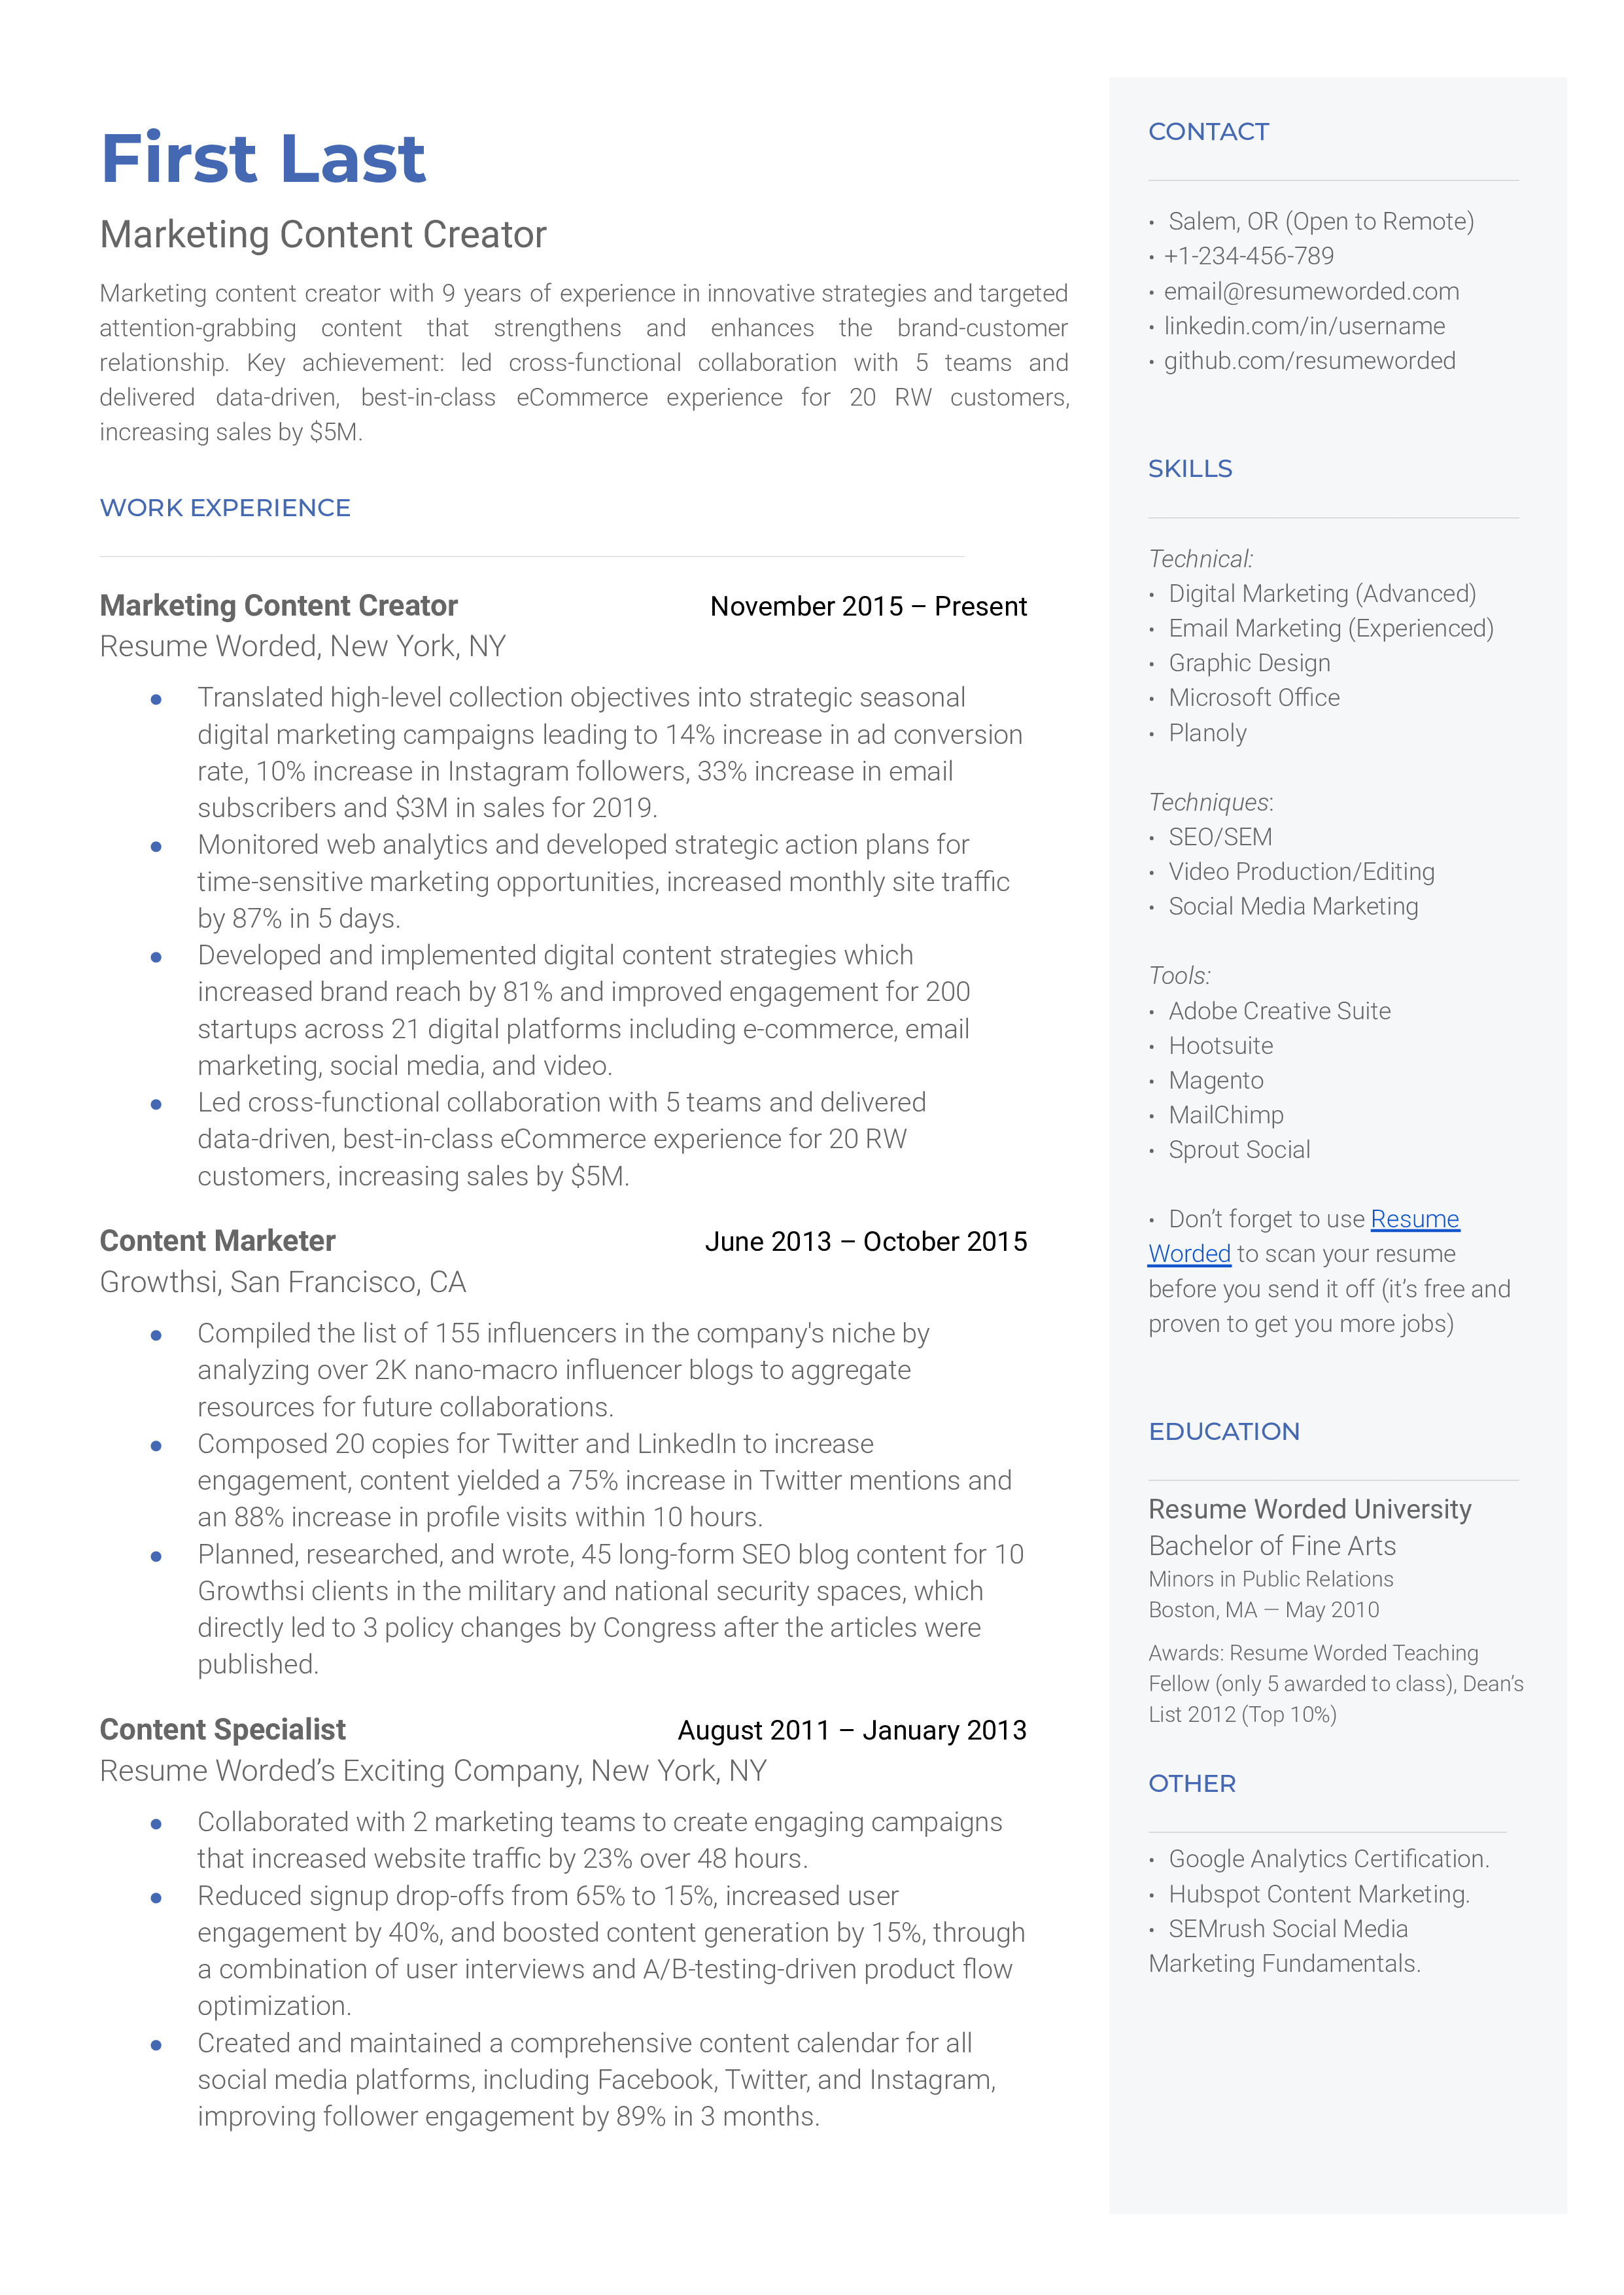 A professional and engaging CV layout showcasing skills, experiences, and results for a Marketing Content Creator role.